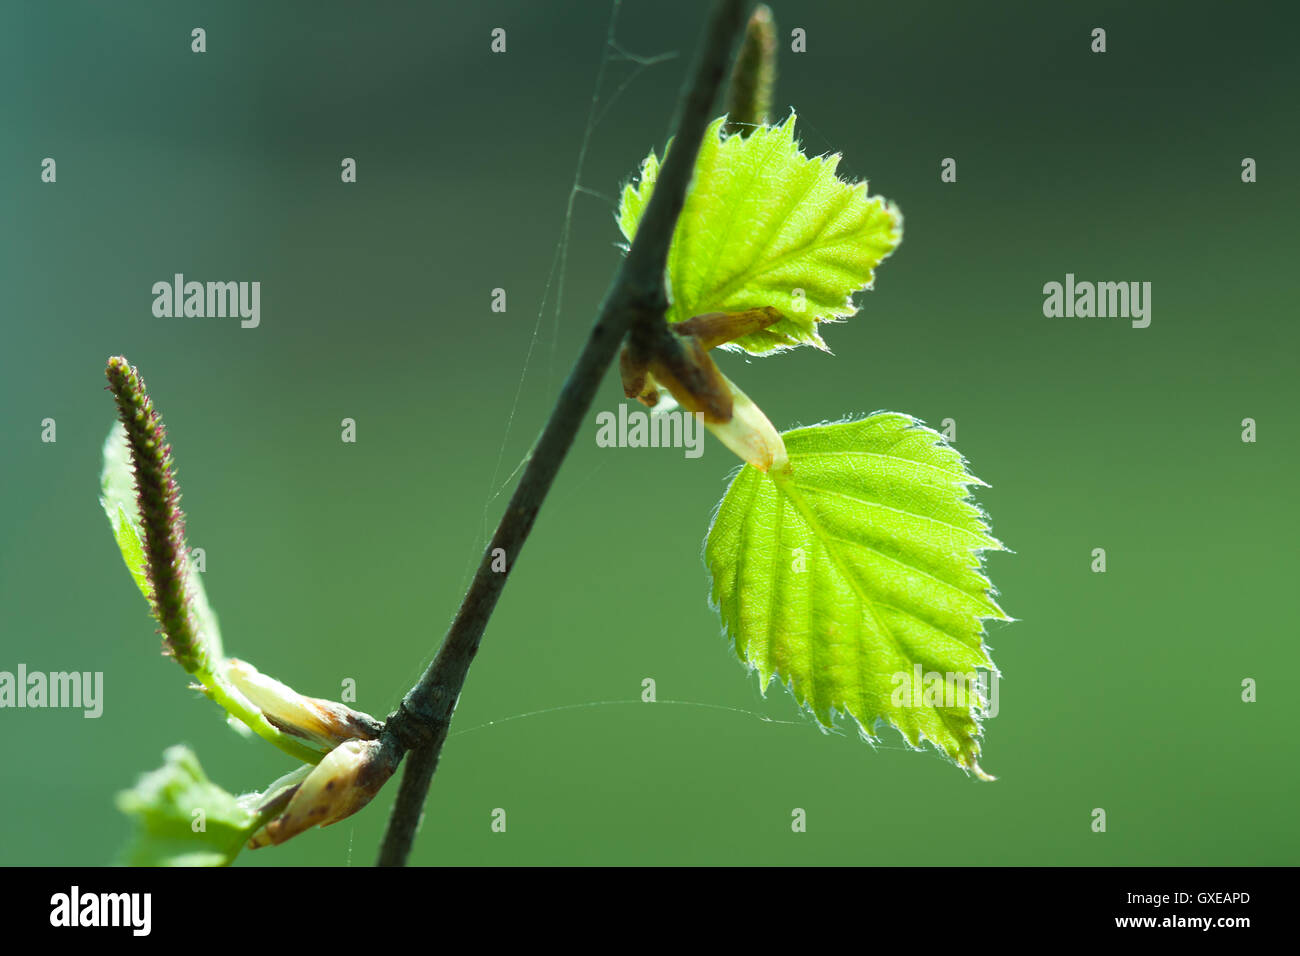 Natural seasonal spring eco backgrond: young birch leaves and catkin closeup  with defocused green forest backdrop. Stock Photo